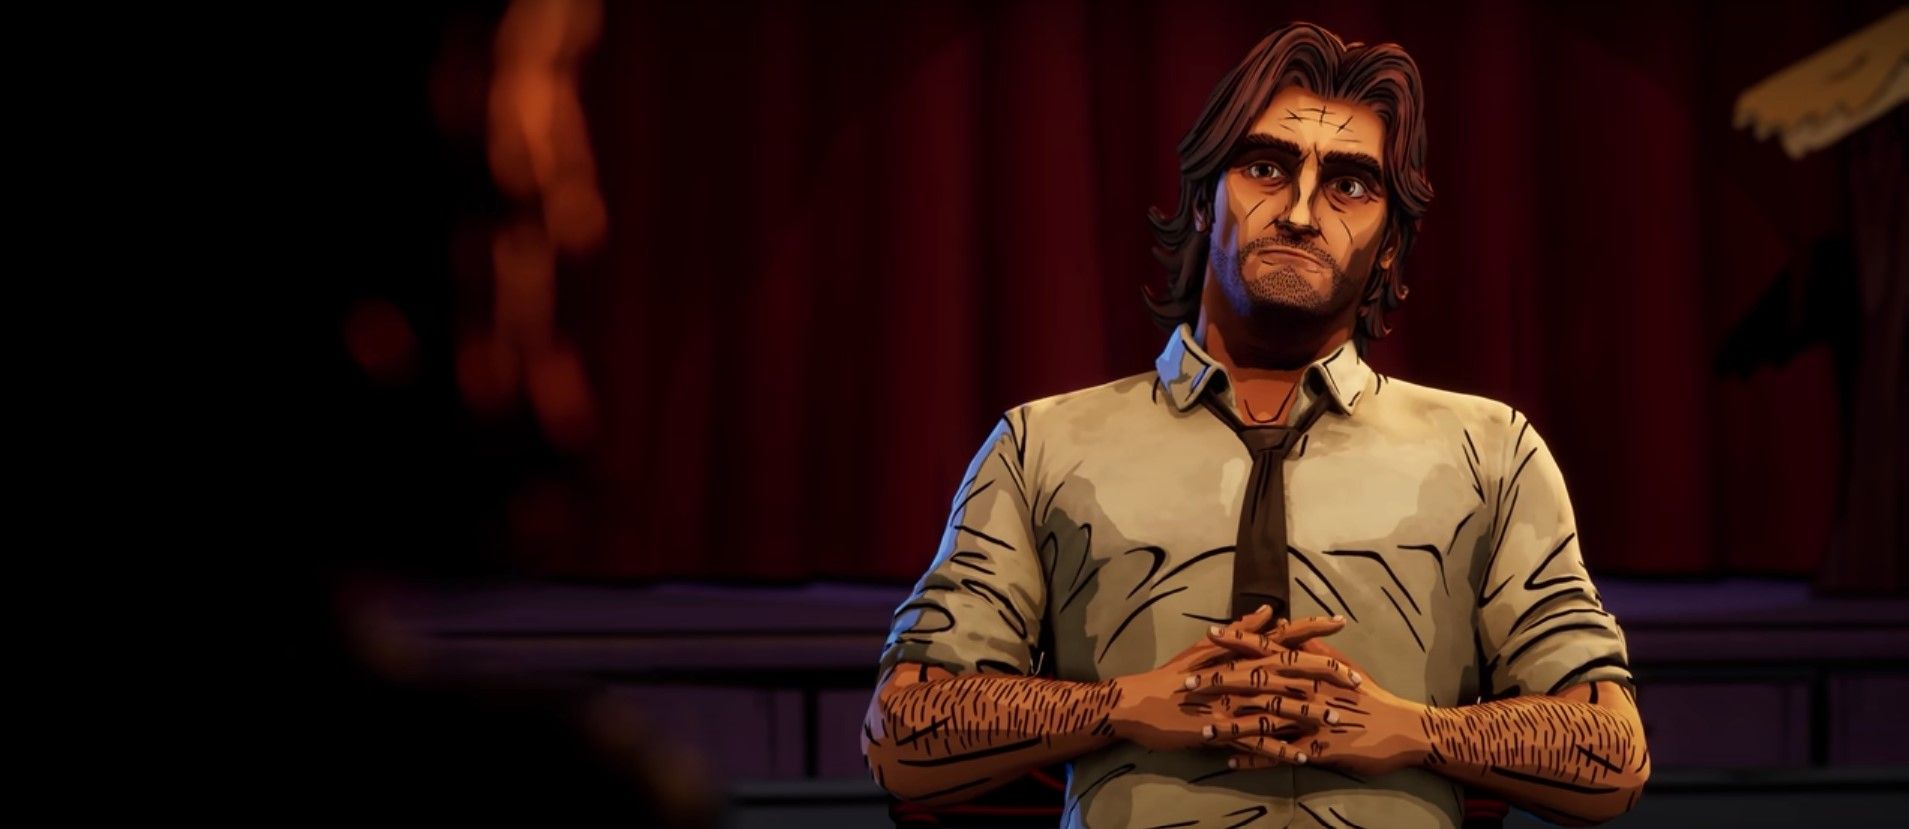 the wolf among us season 2 game release date